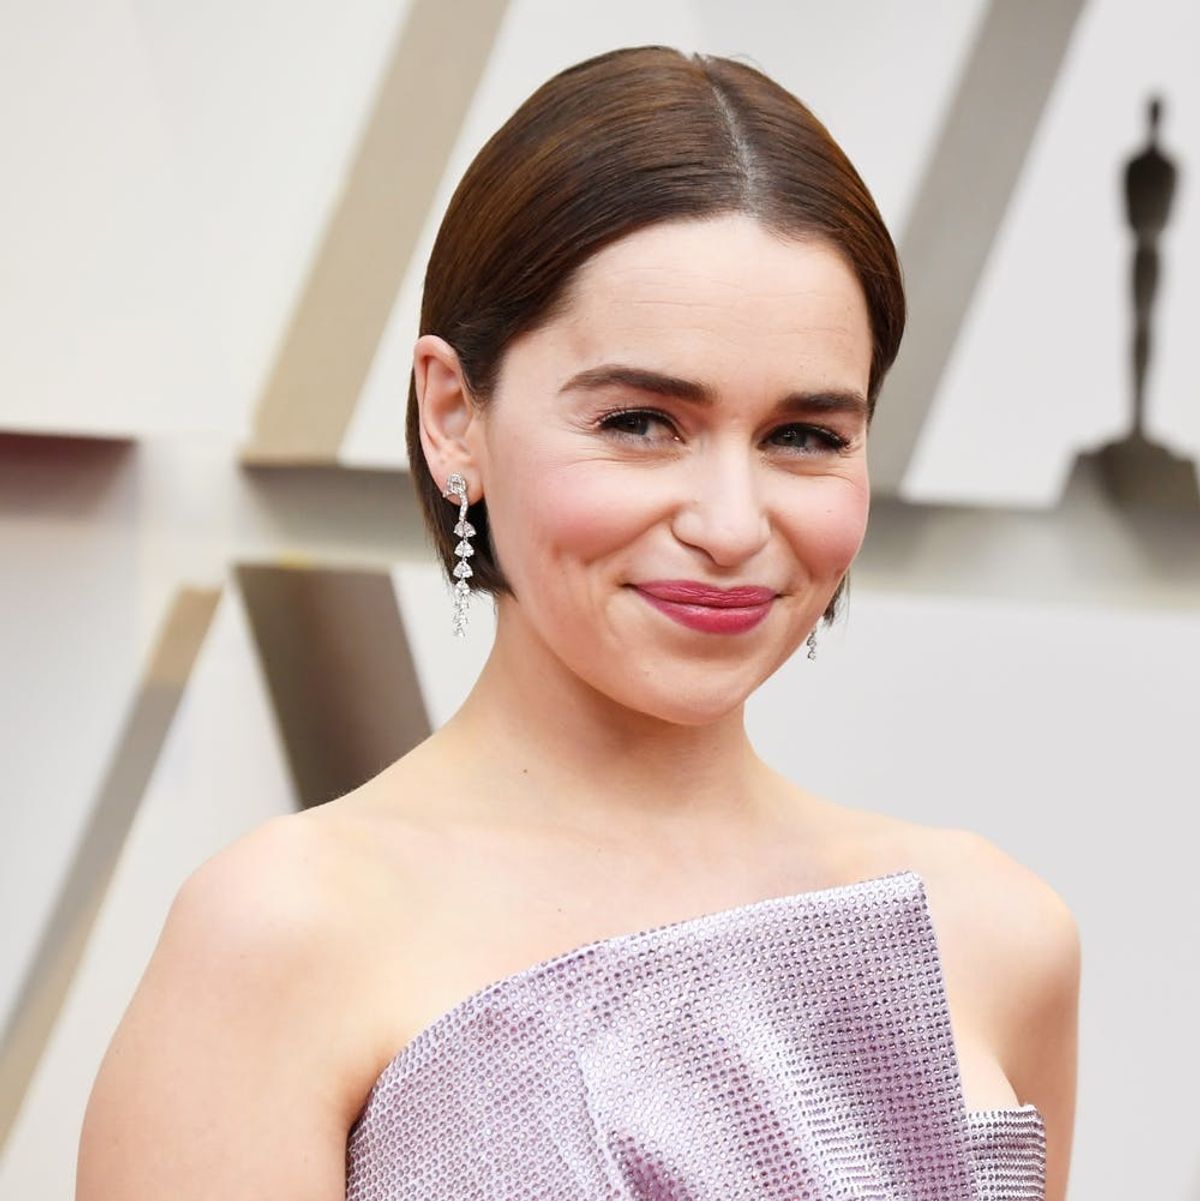 Emilia Clarke Opens Up About Suffering 2 Brain Aneurysms: “I Thought I Was Going to Die”